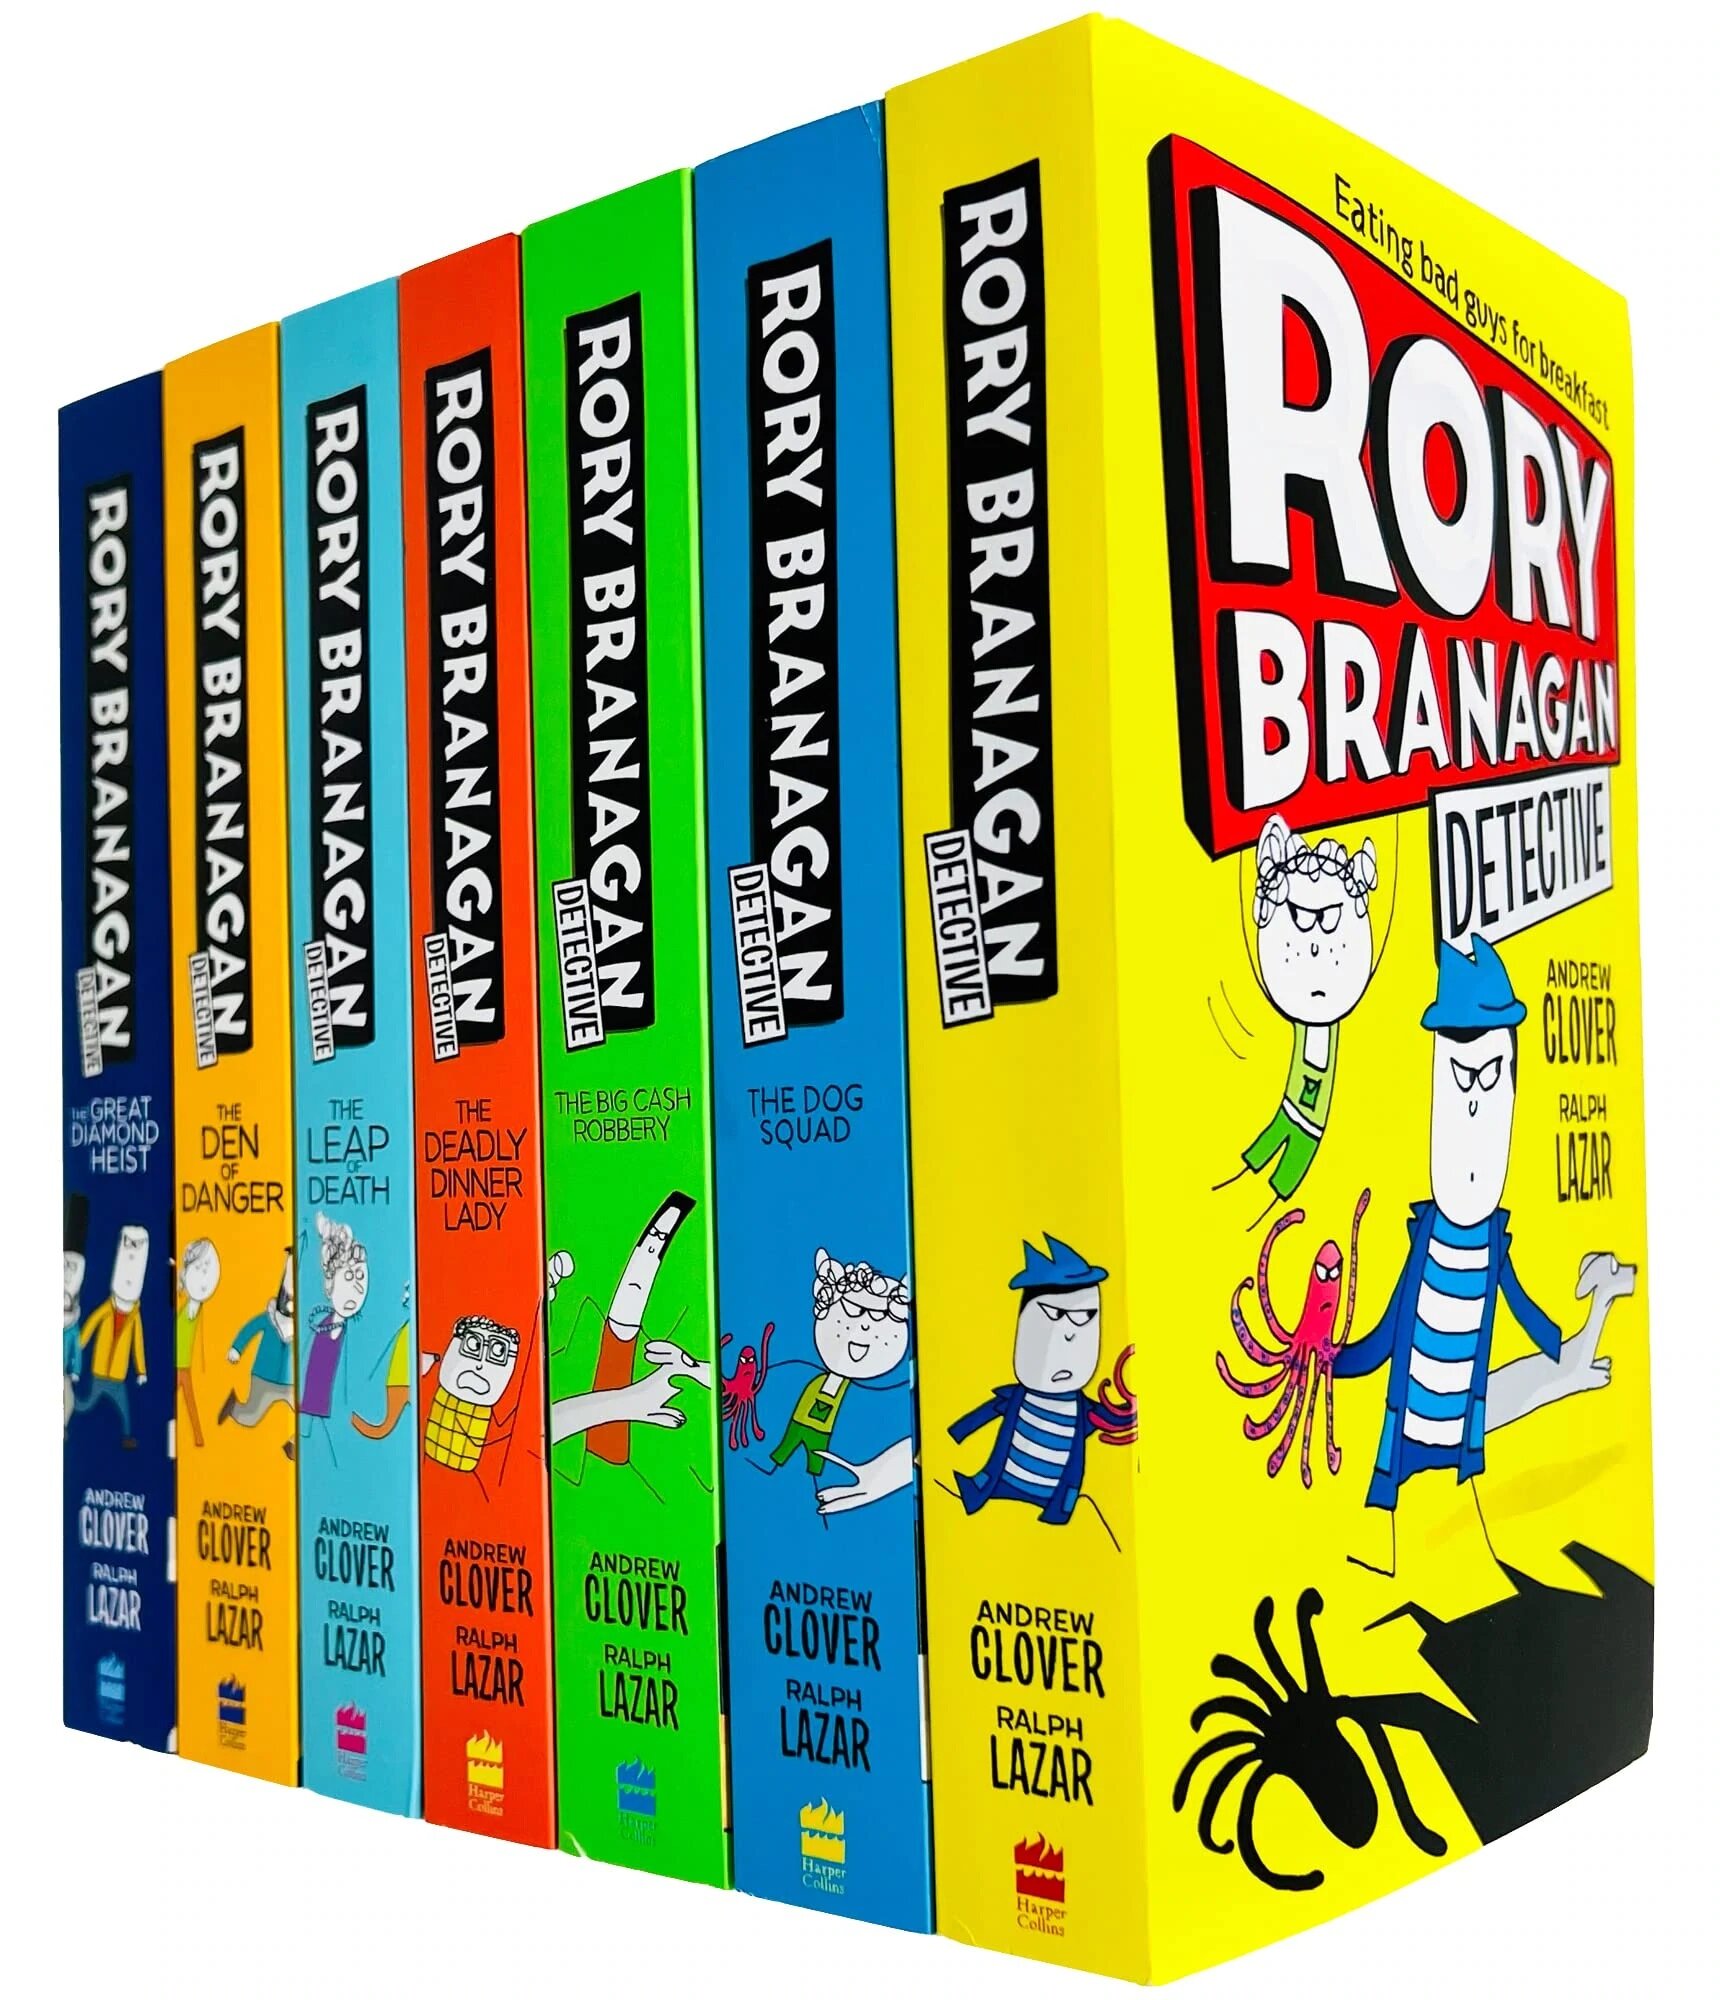 Rory Branagan Detective Series Books 1 - 7 Collection Set (Paperback 7권)